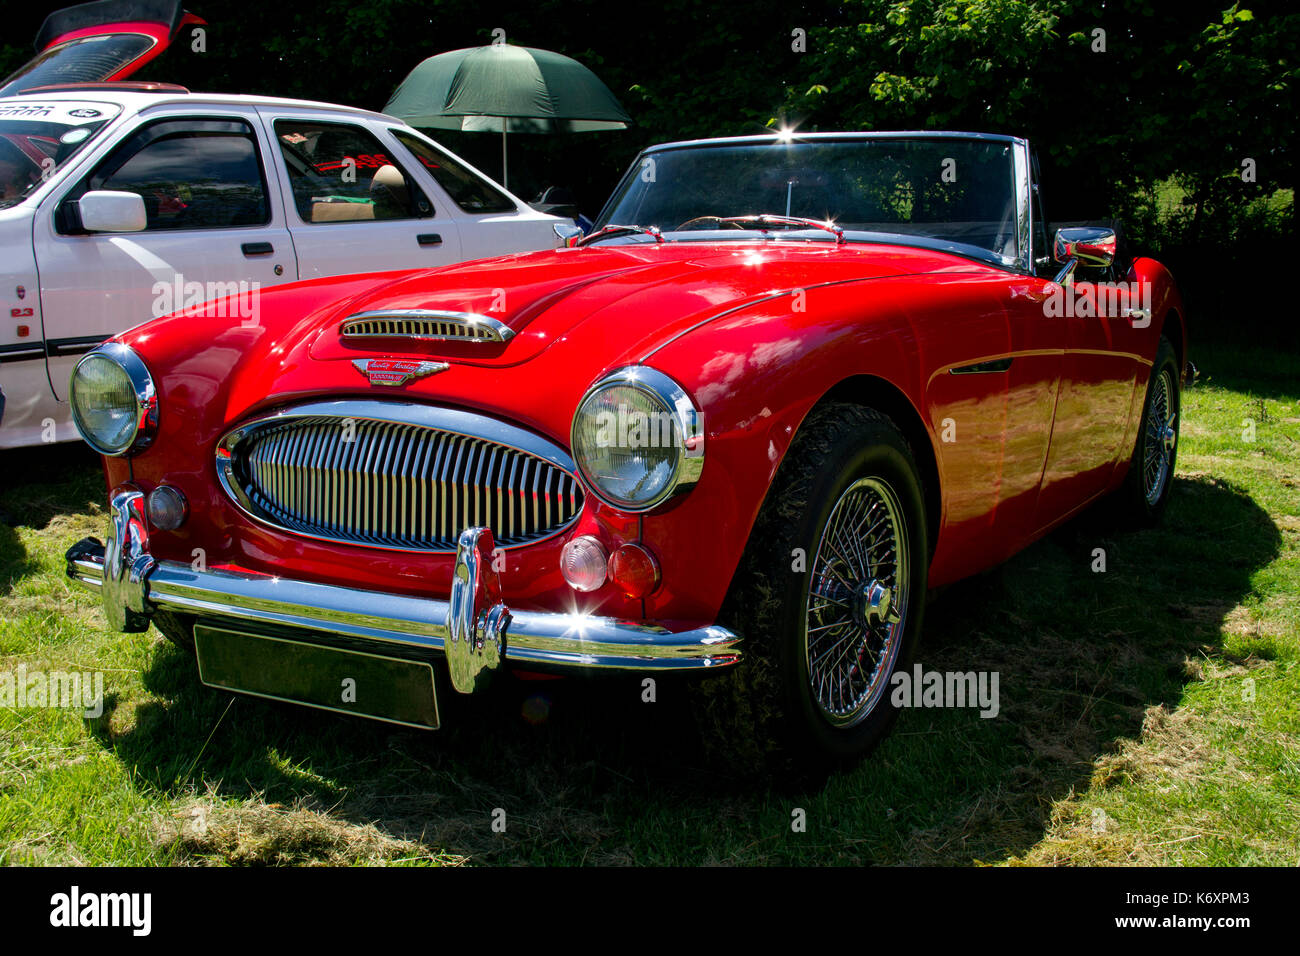 Front view of a bright red Austin Healey sports car on display at a classic car show in Wales UK Stock Photo